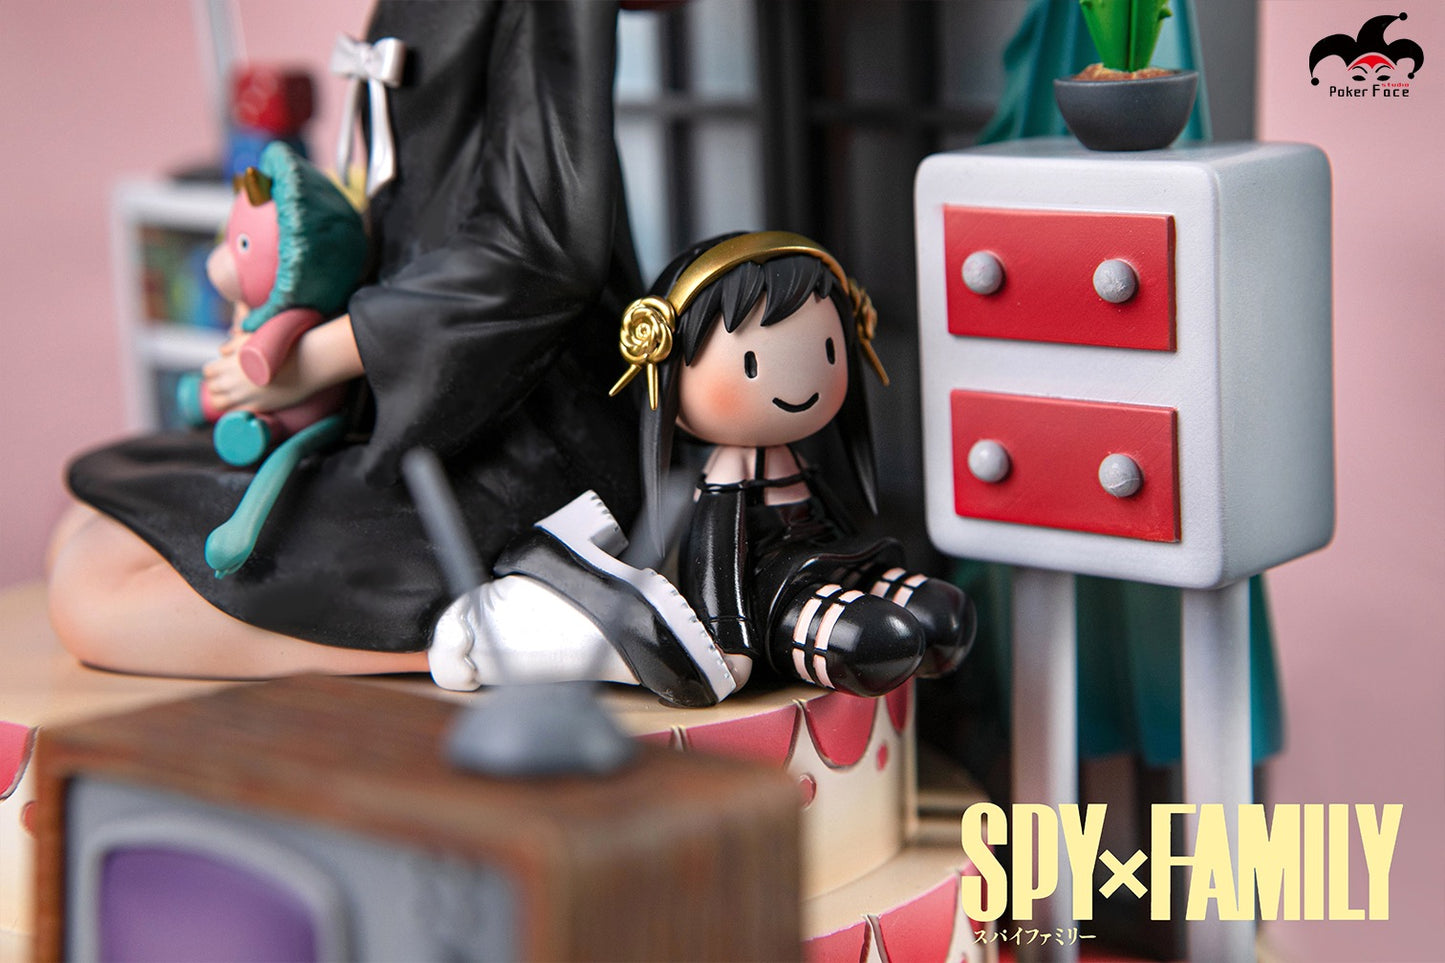 POKER FACE STUDIO – SPY x FAMILY: ANYA FORGER [SOLD OUT]